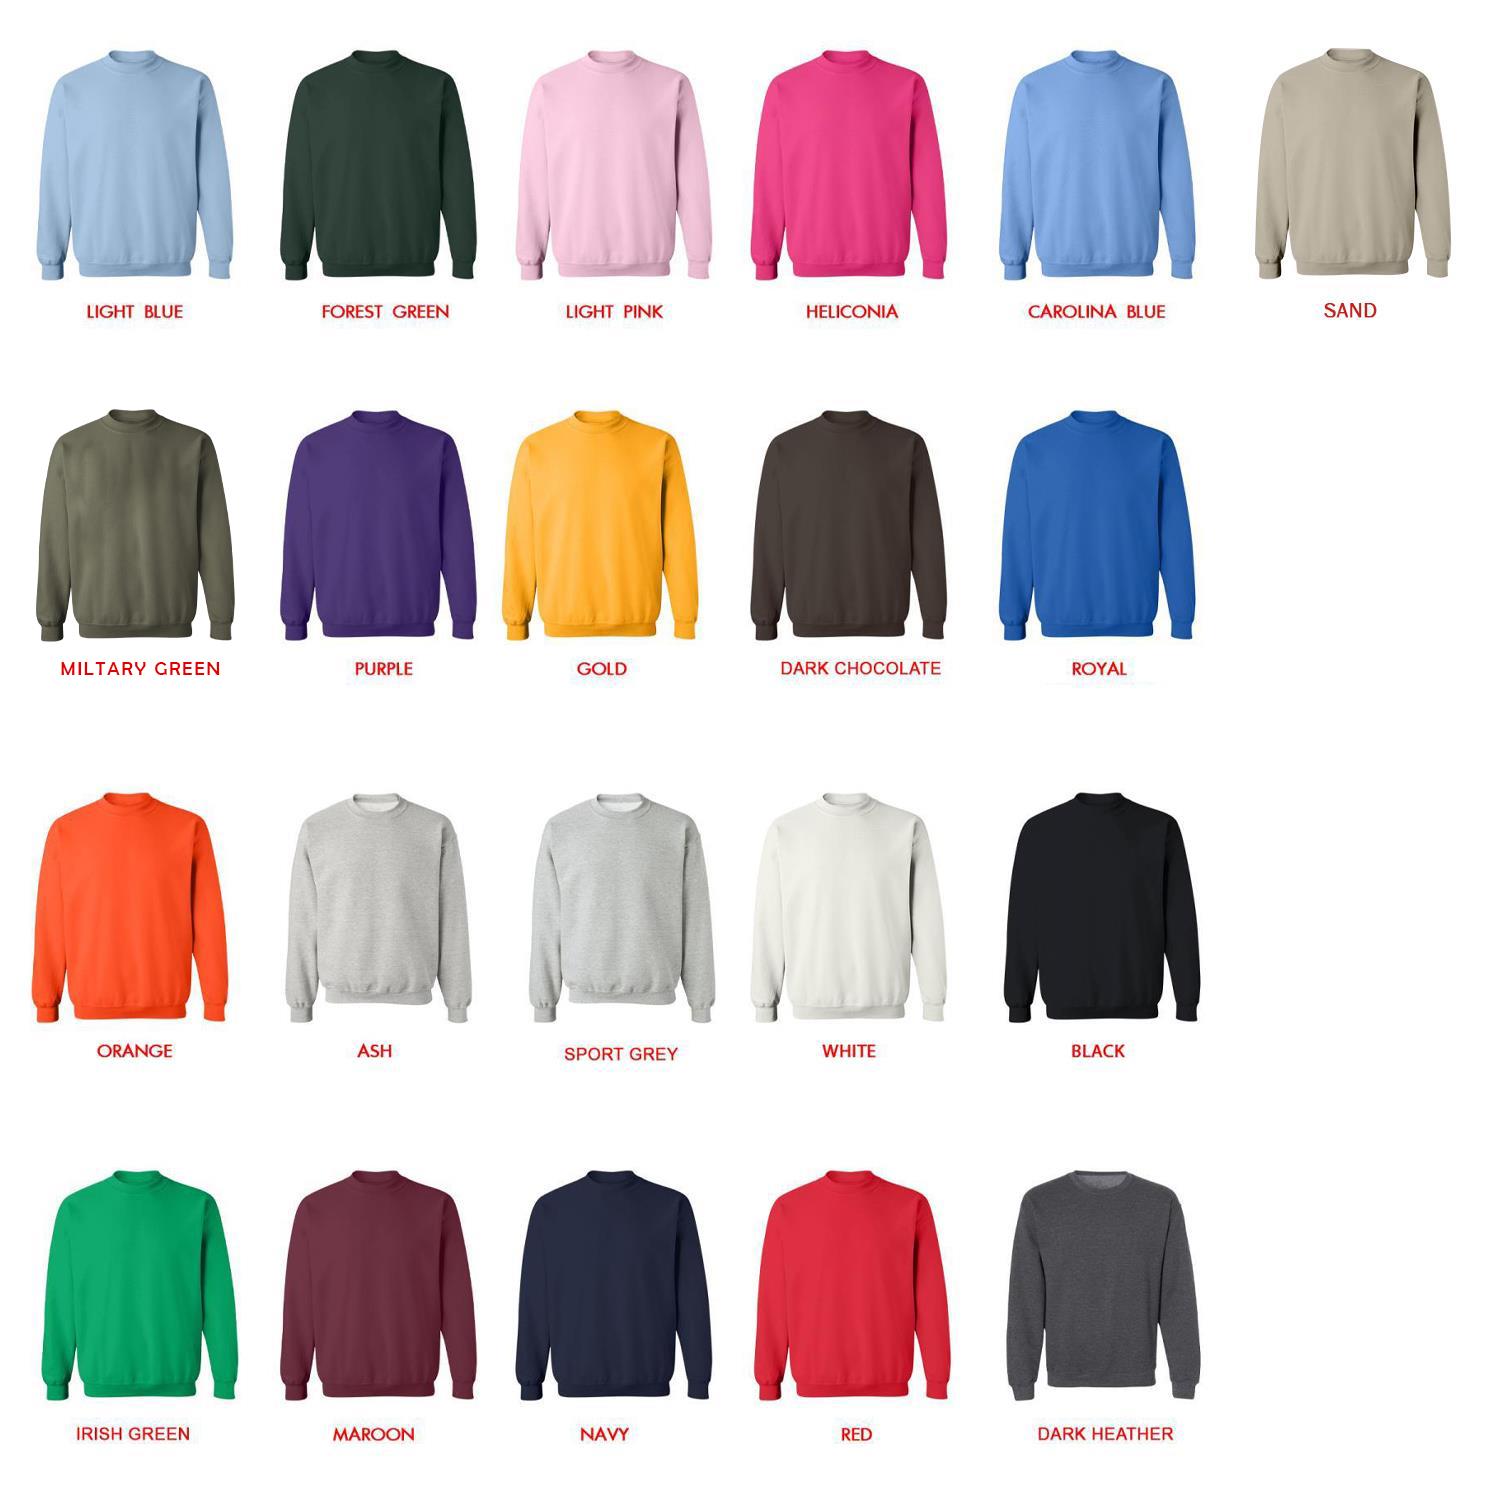 sweatshirt color chart - Kacey Musgraves Store